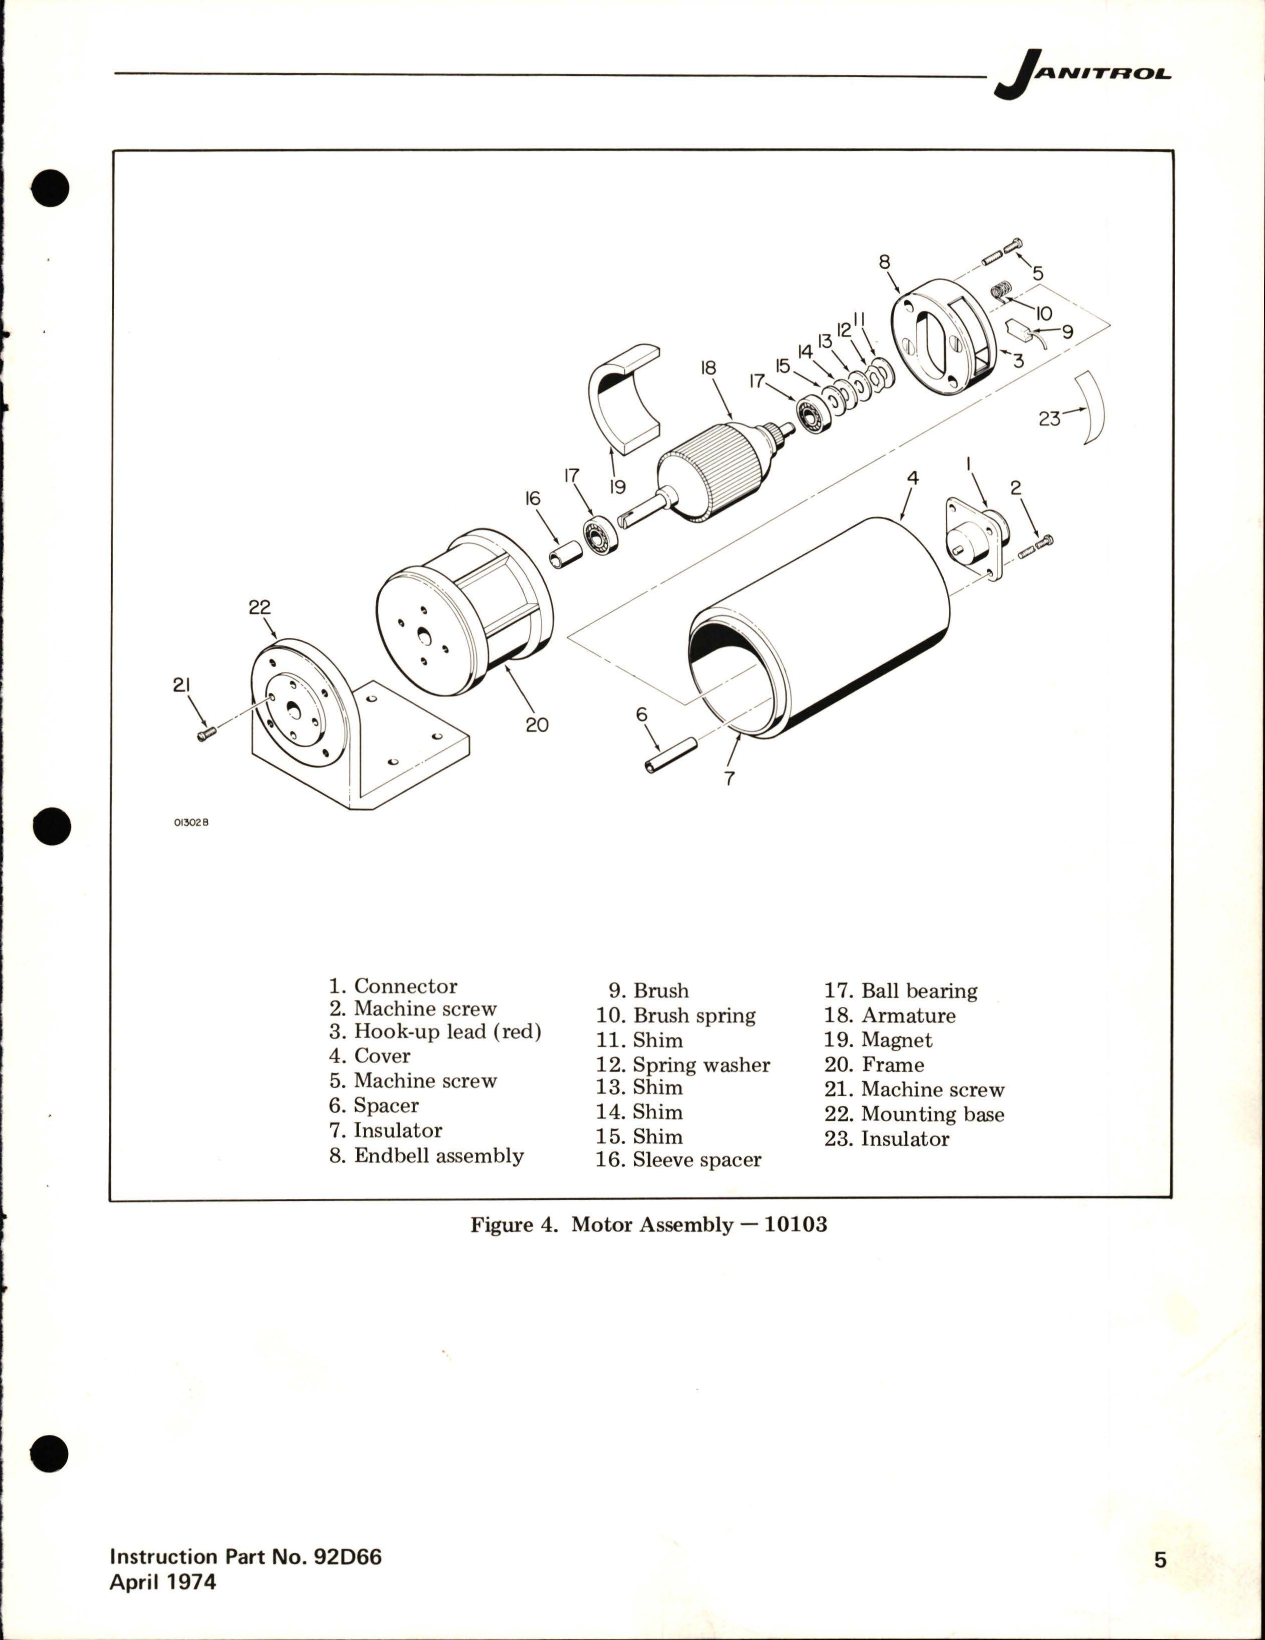 Sample page 5 from AirCorps Library document: Maintenance Instructions for Fuel Pump and Motor Assembly - Parts 70D10, A70D10, and A70D19